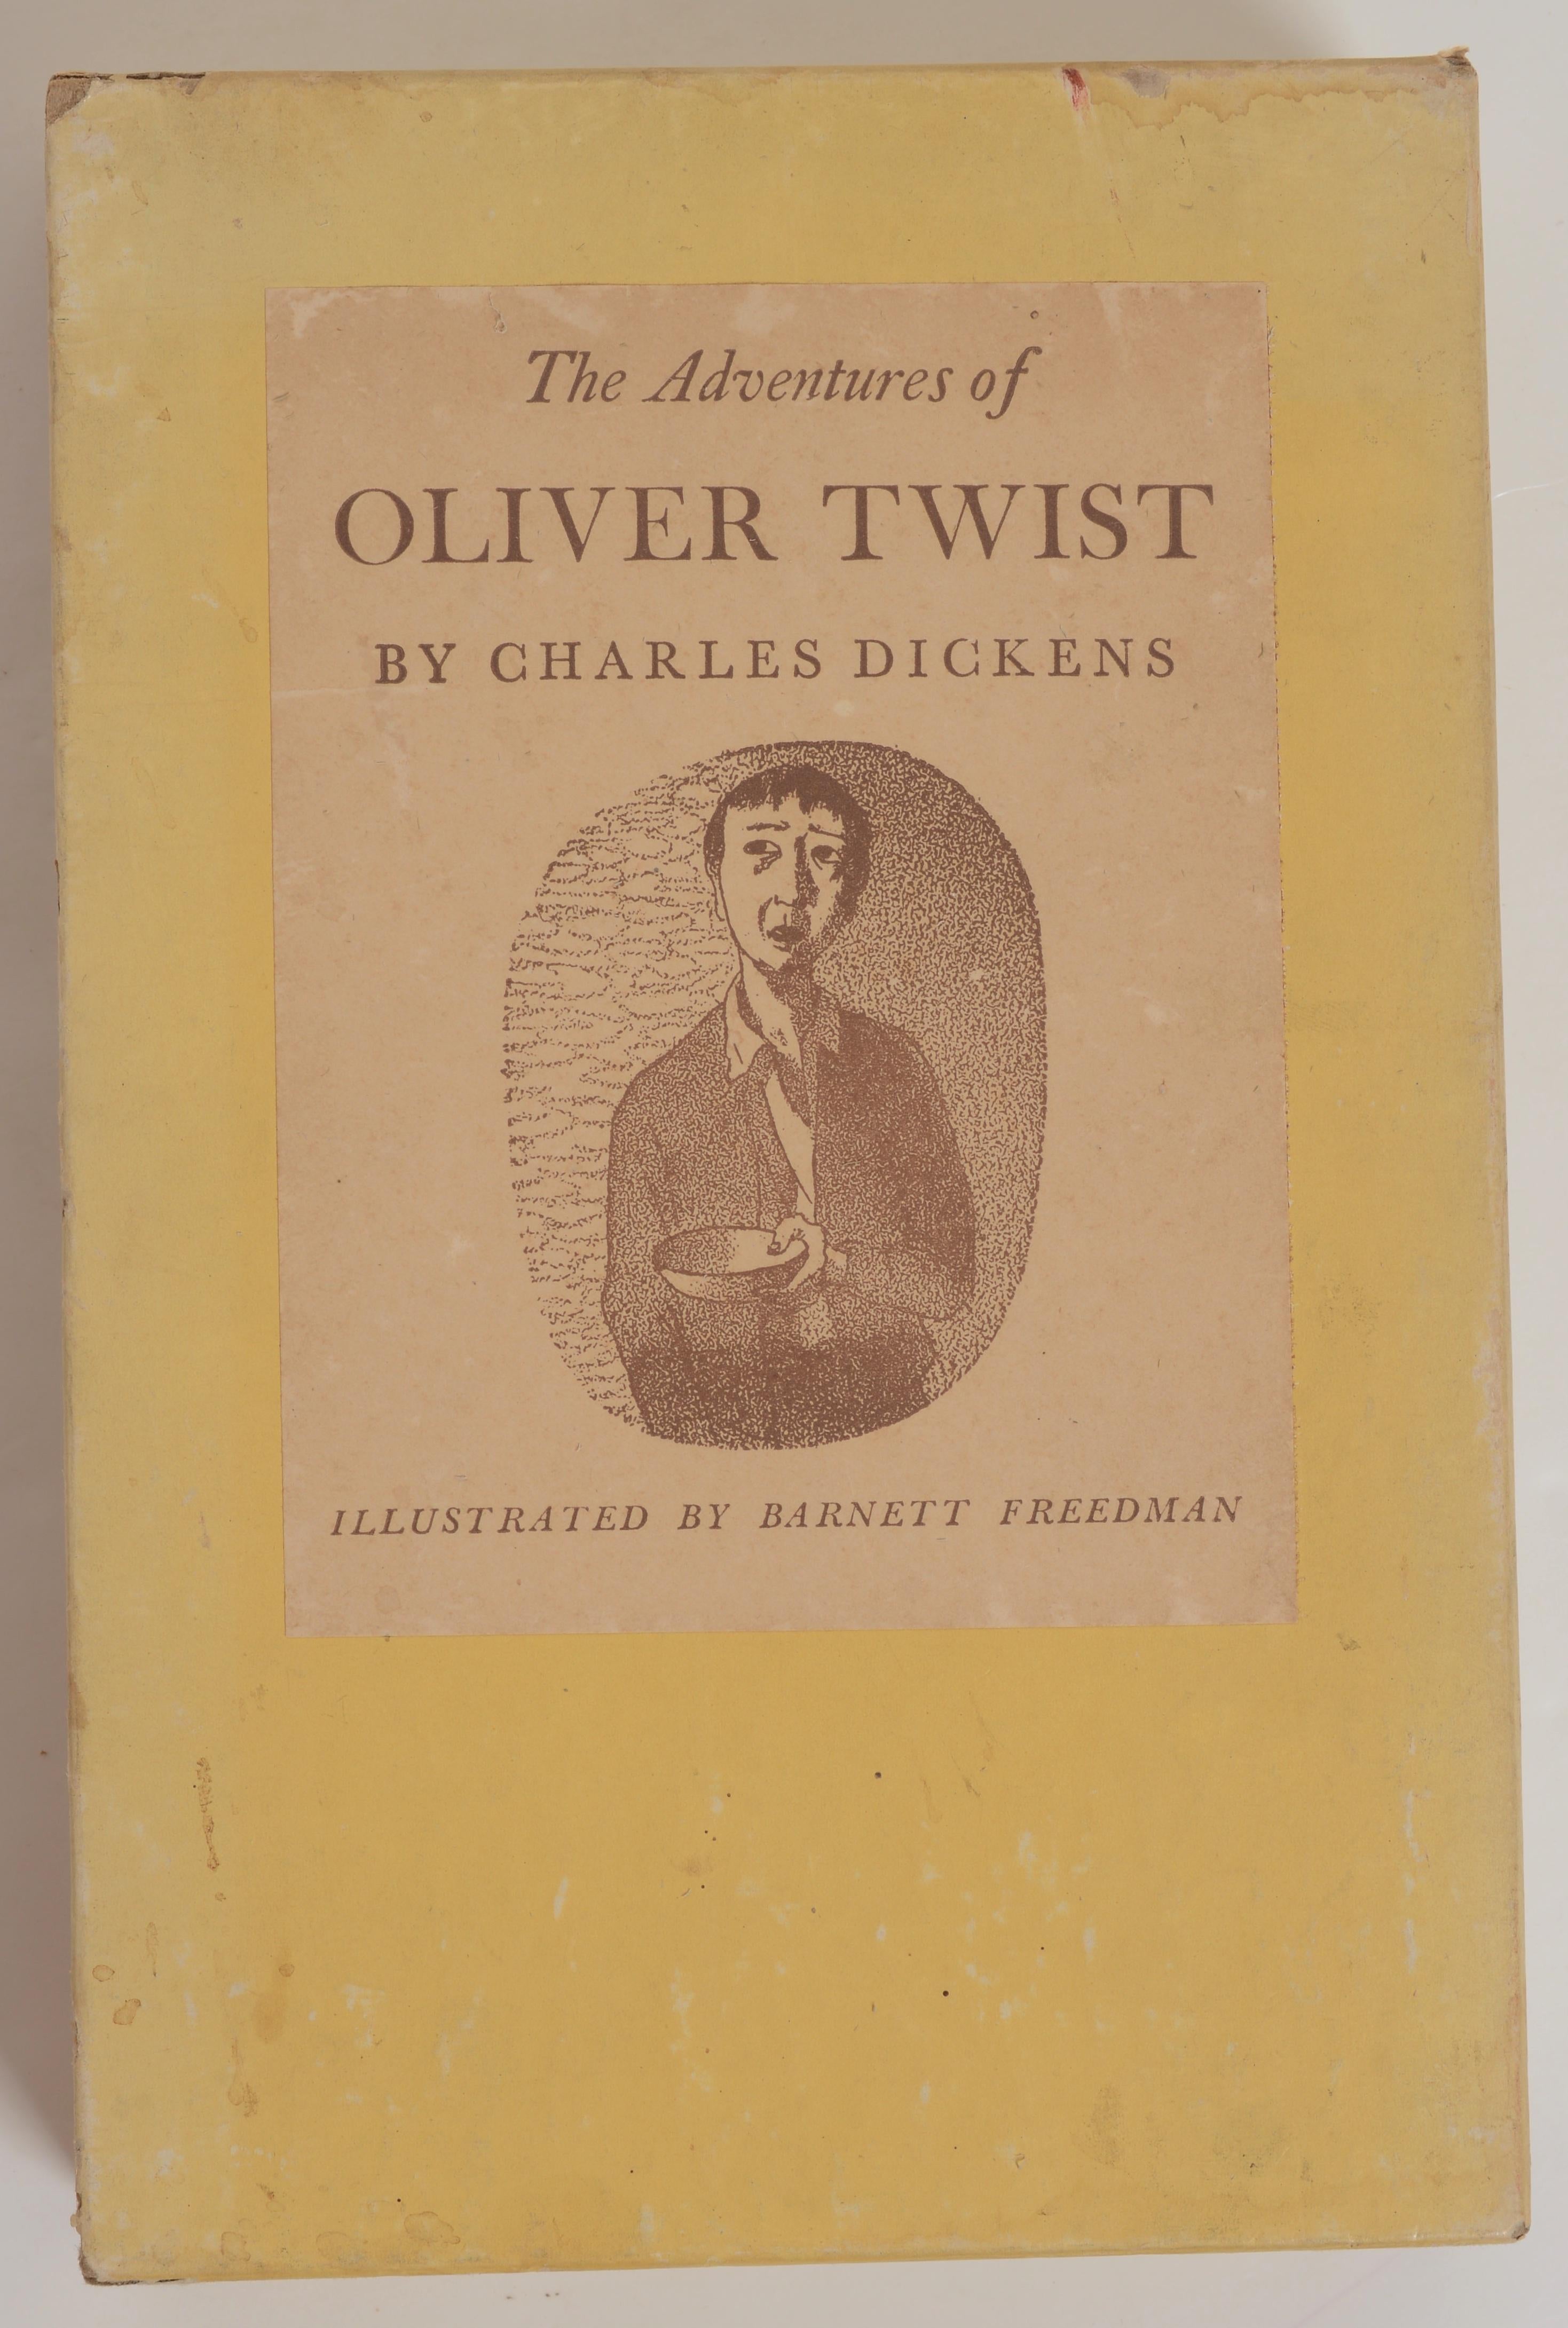 The Adventures of Oliver Twist, by Charles Dickens. 1st Ed Thus hardcover with slip case. Oliver Twist, or the Parish Boy's Progress, Charles Dickens' 2nd novel, was published as a serial from 1837 to 1839, and as a 3-volume book in 1838. Born in a